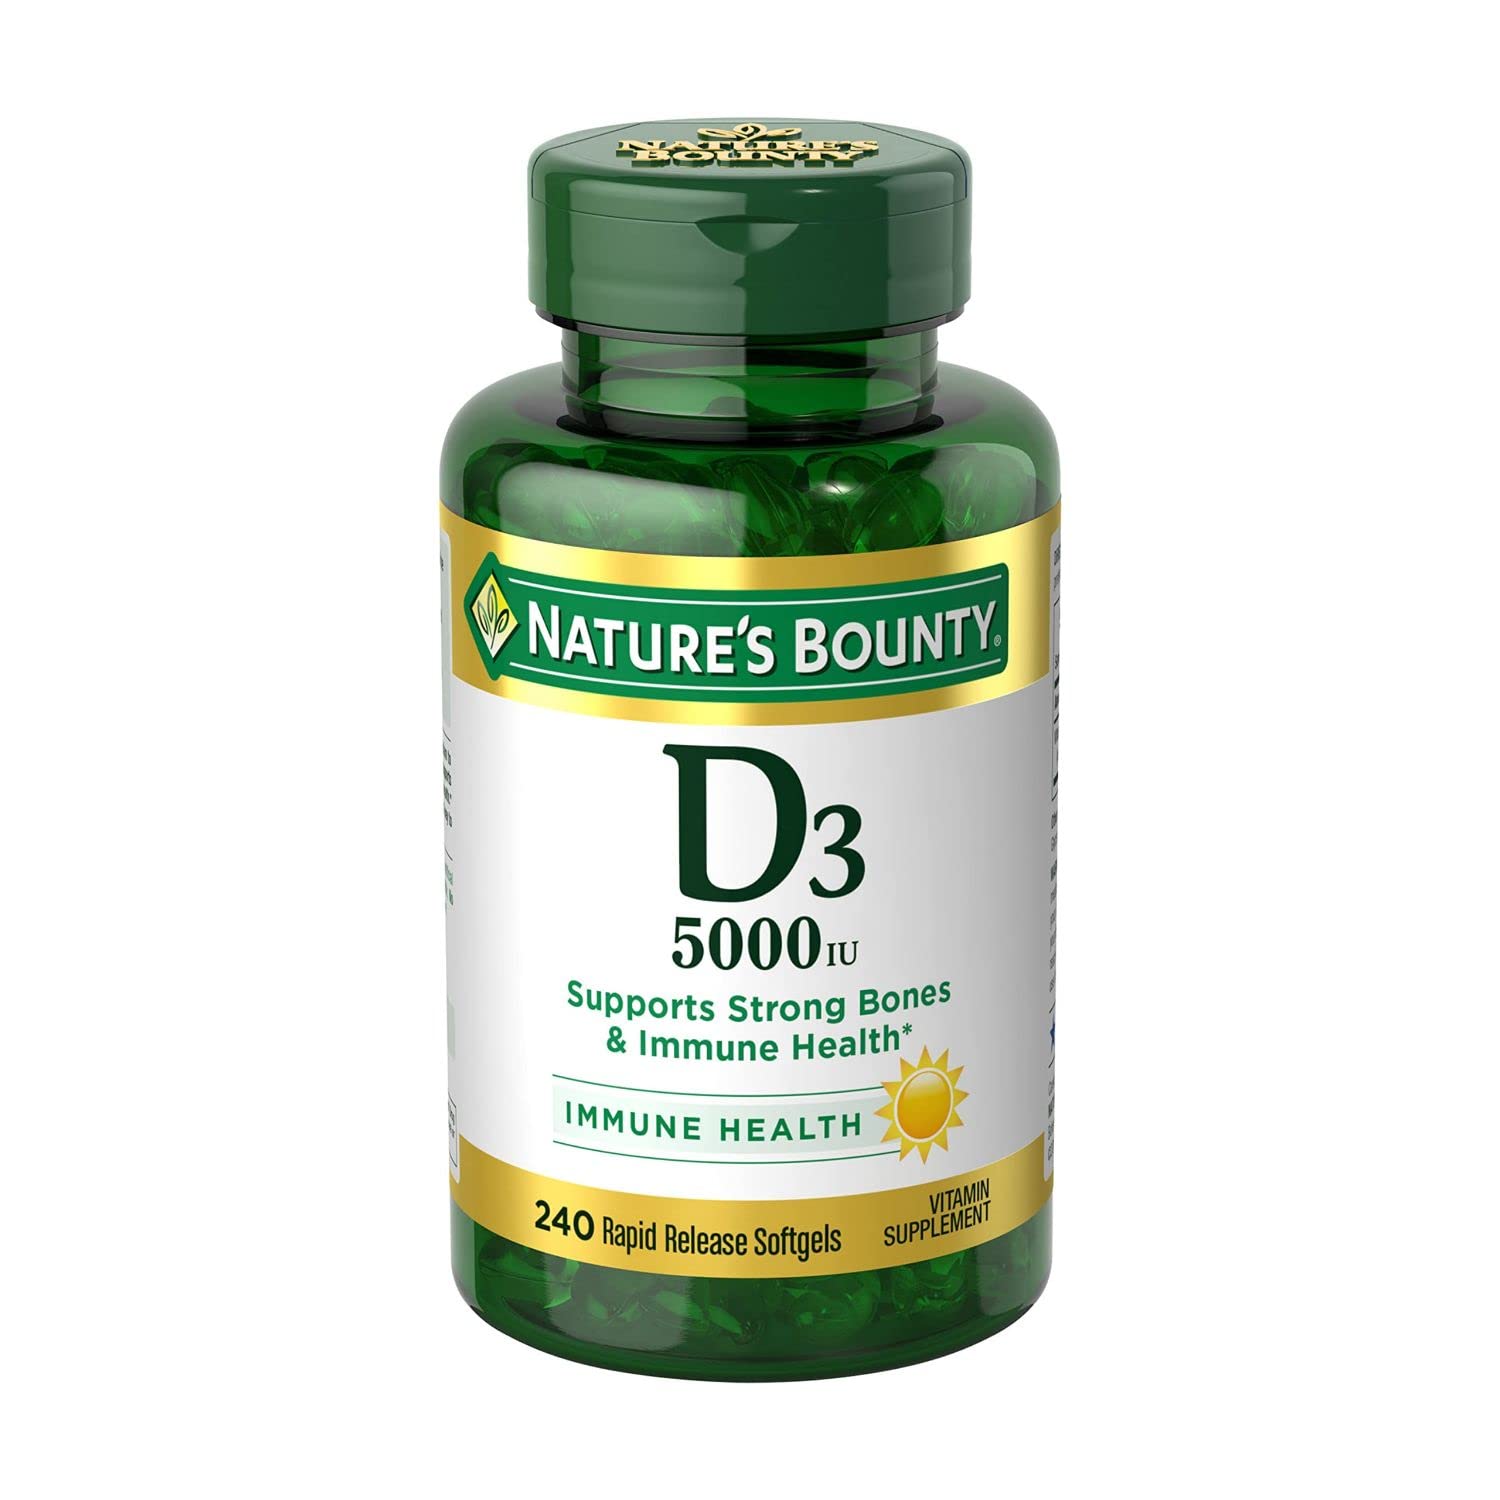 Nature’s Bounty Vitamin D3, Immune Support, 125 mcg (5000iu), Rapid Release Softgels, 240 Ct (package may differ)